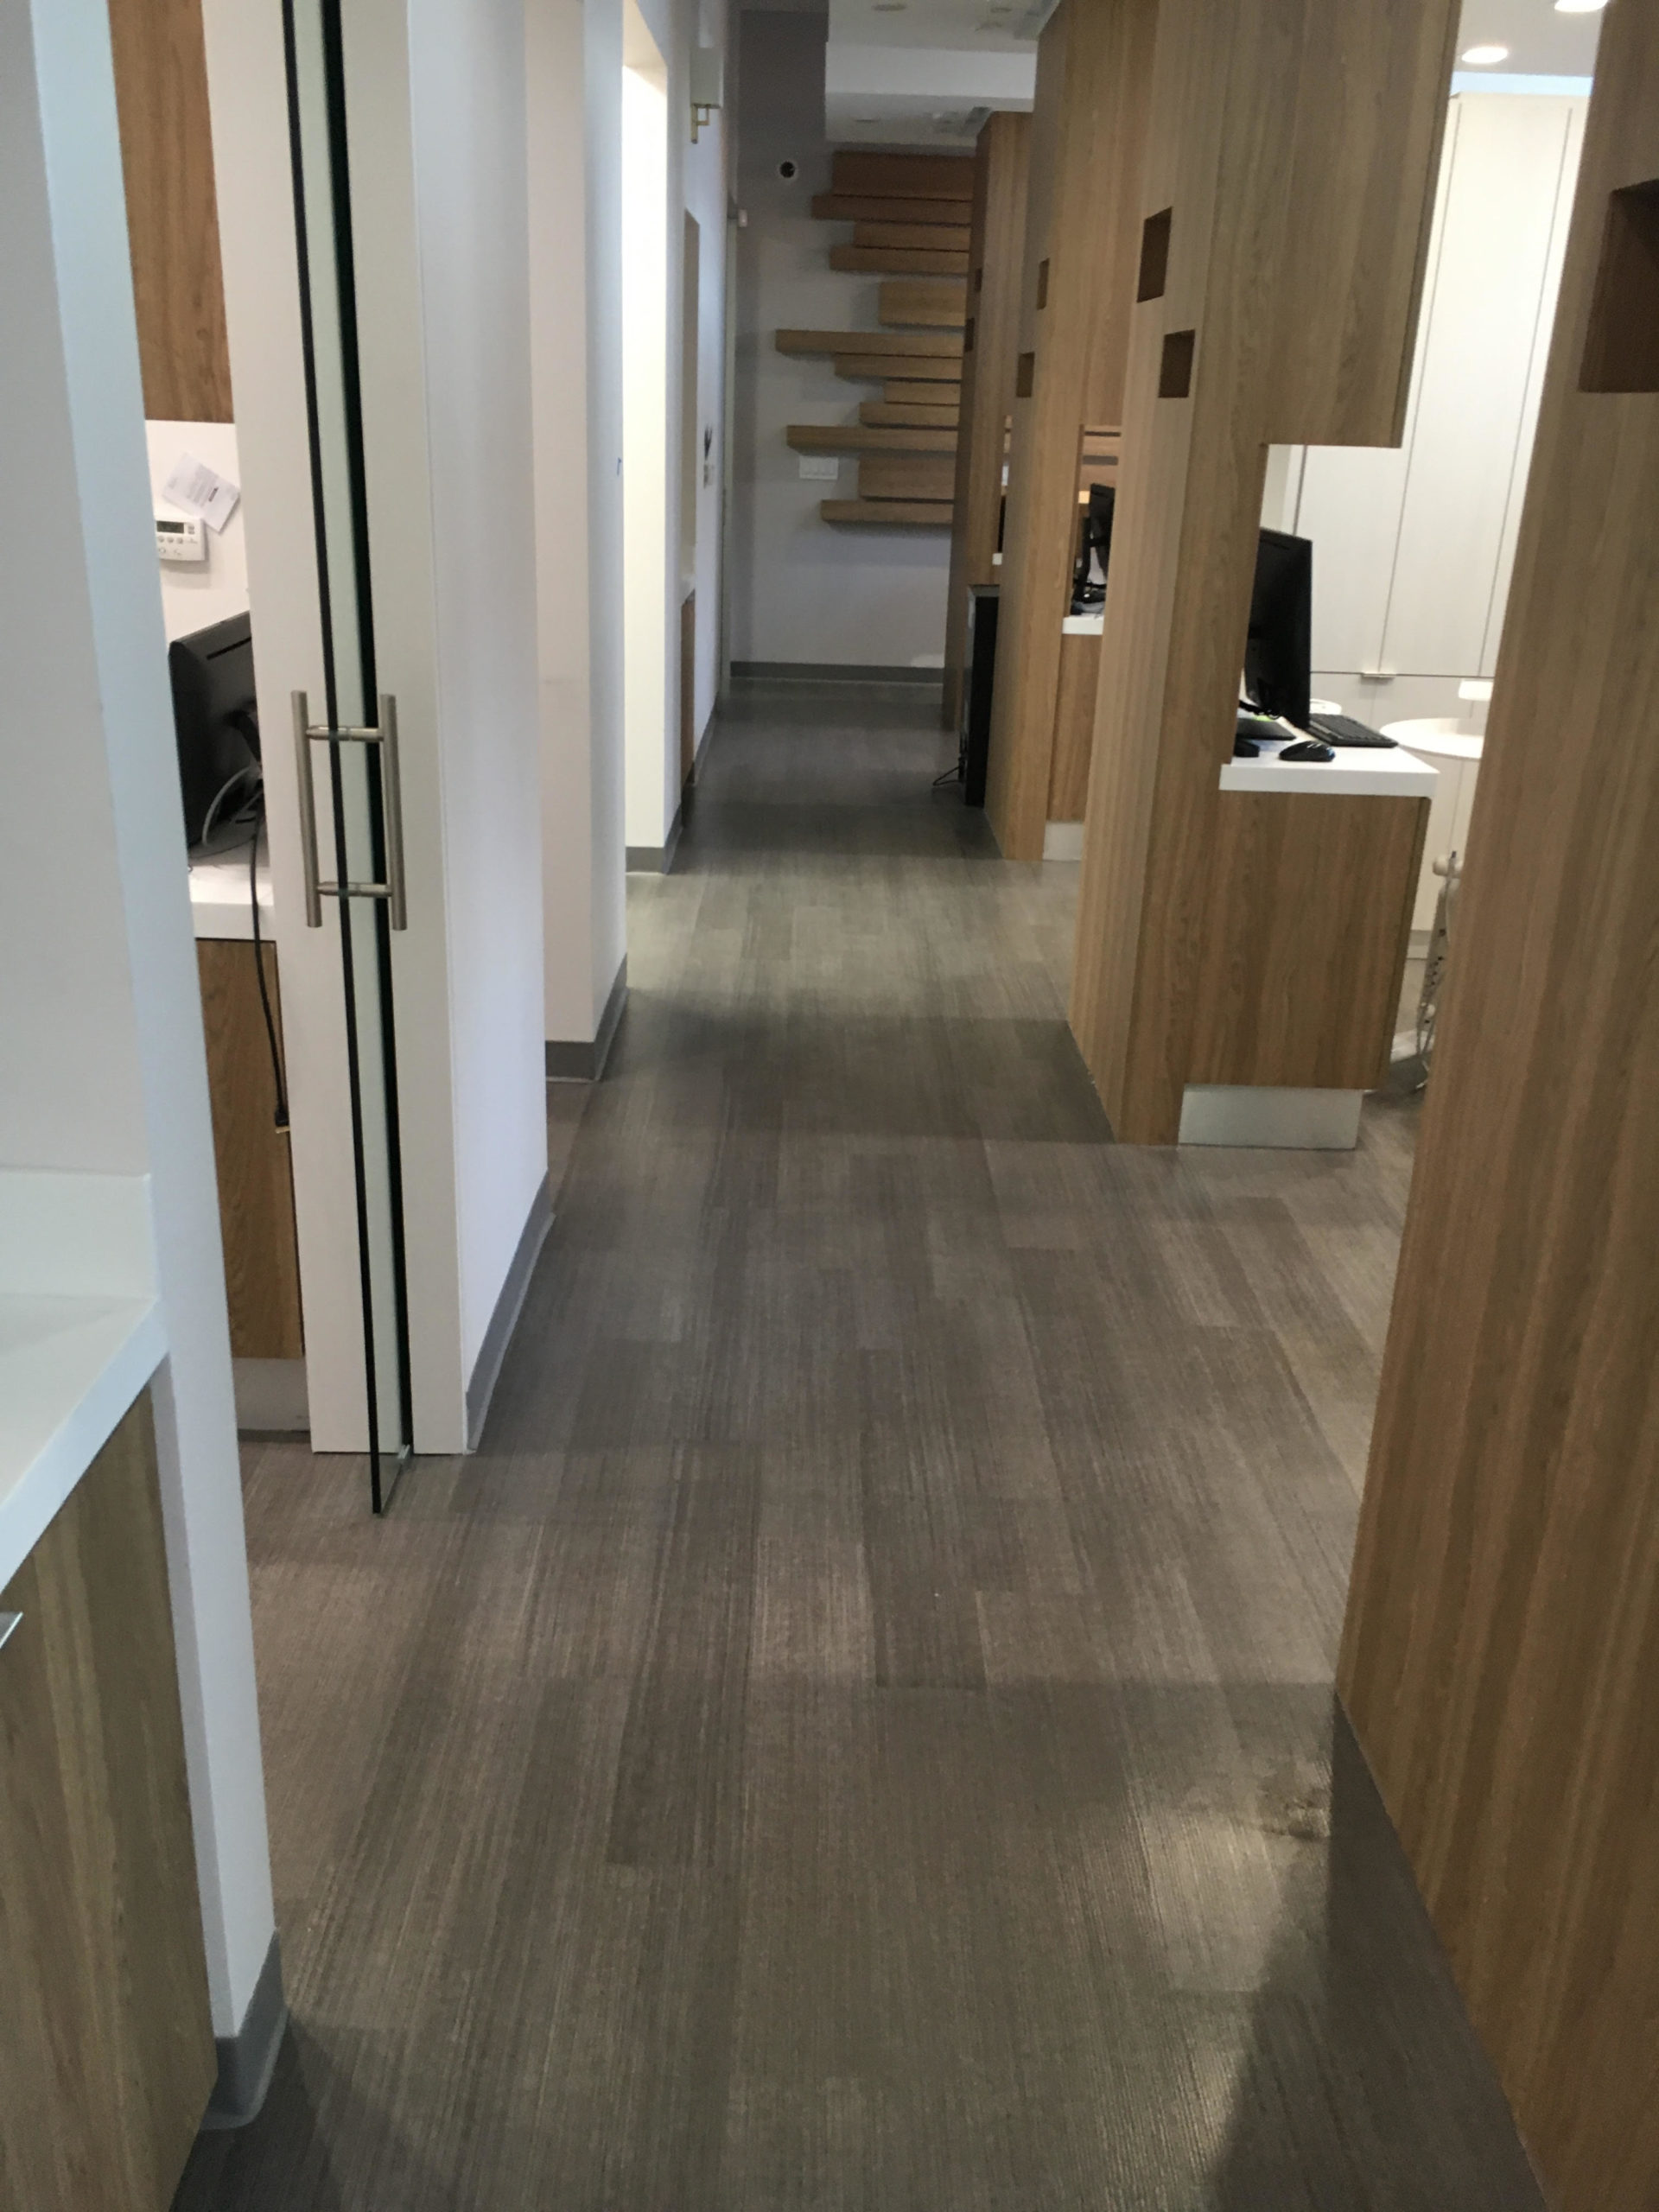 Dental Office in San Francisco with a new luxury vinyl plank flooring  installed on concrete subfloor. - Floors4install